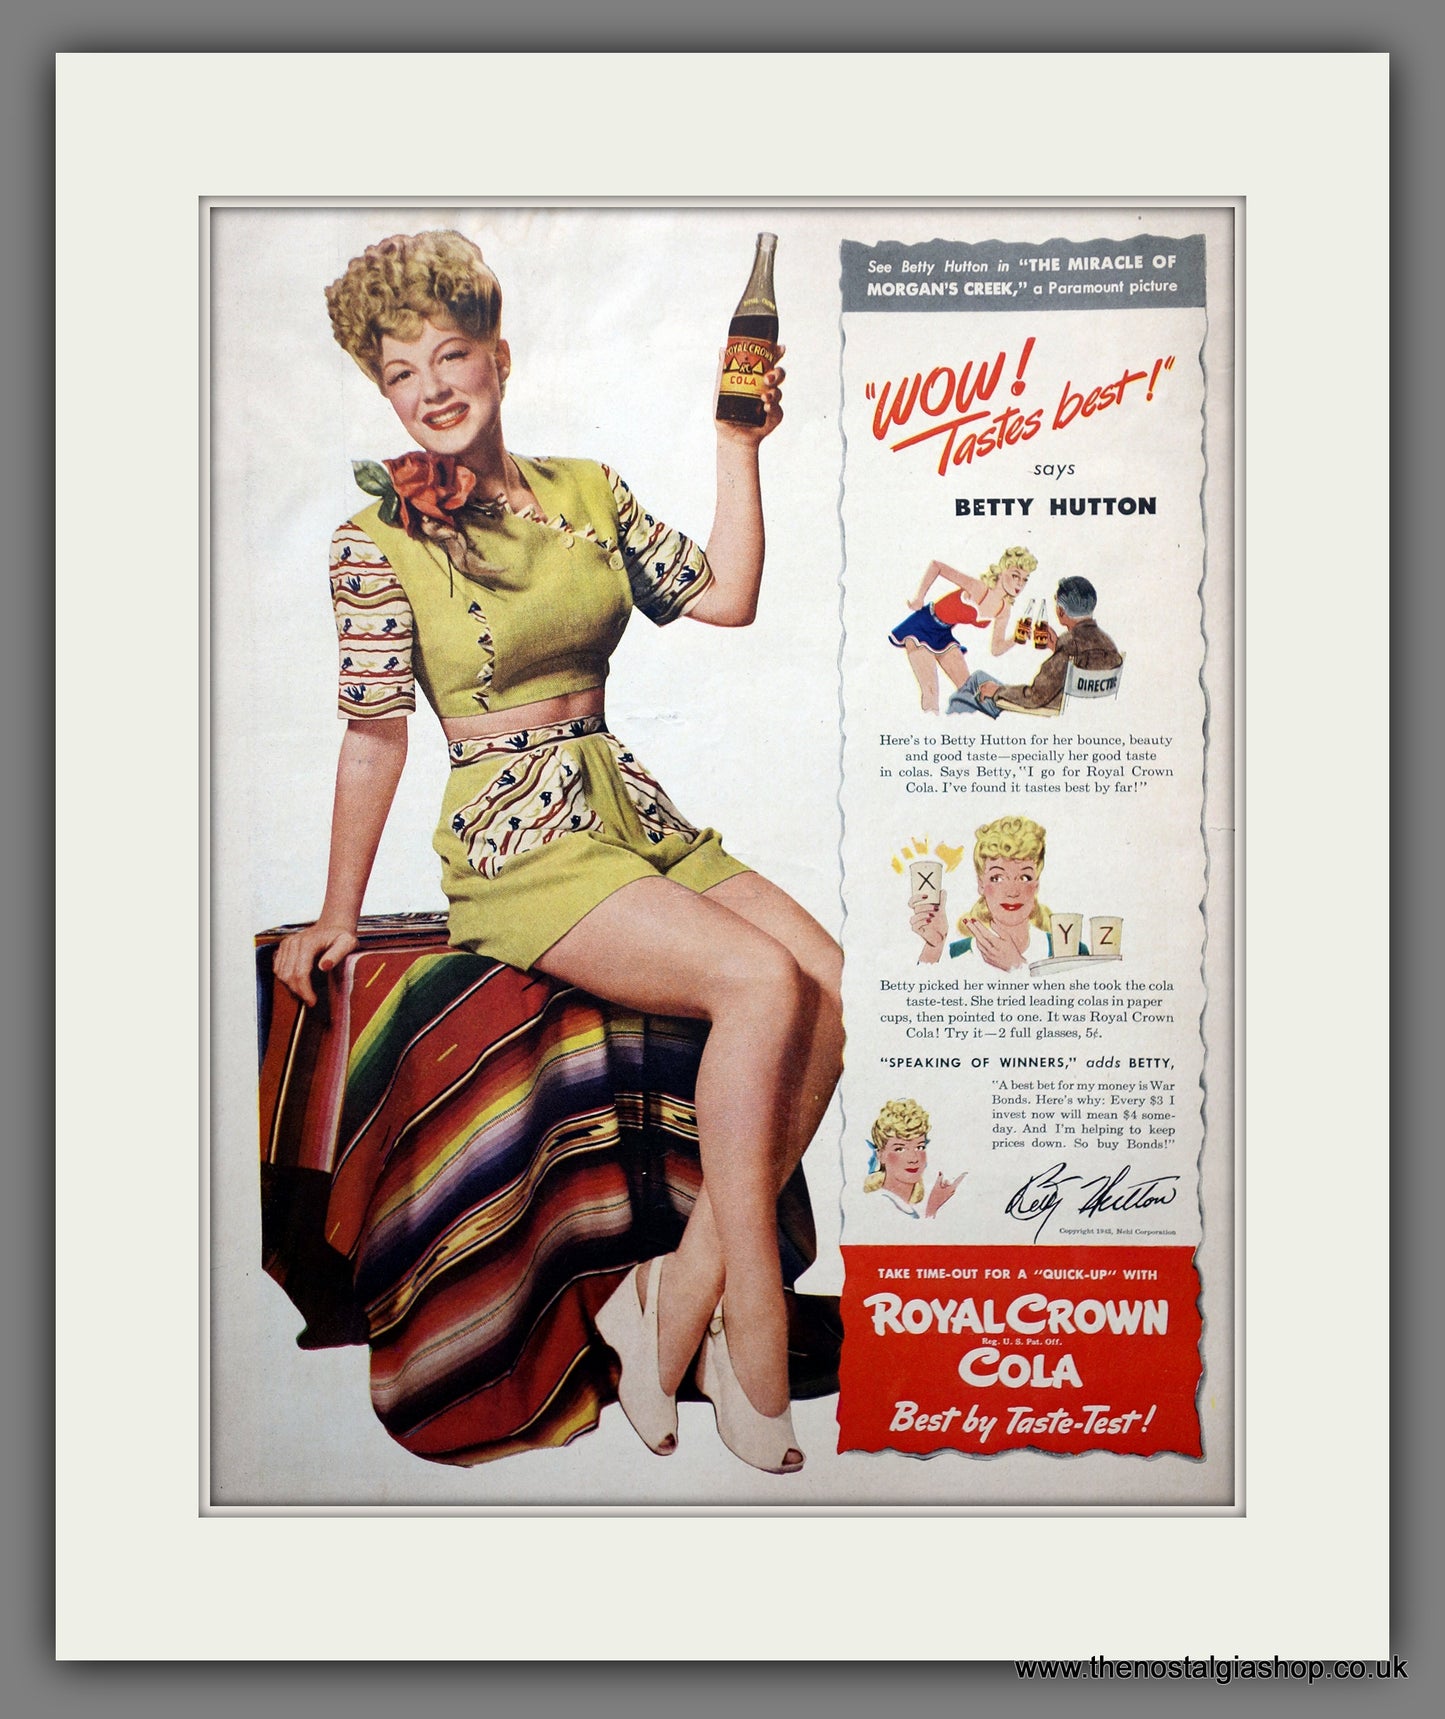 Royal Crown Cola with Betty Hutton. Original American Advert 1943 (ref AD301216)